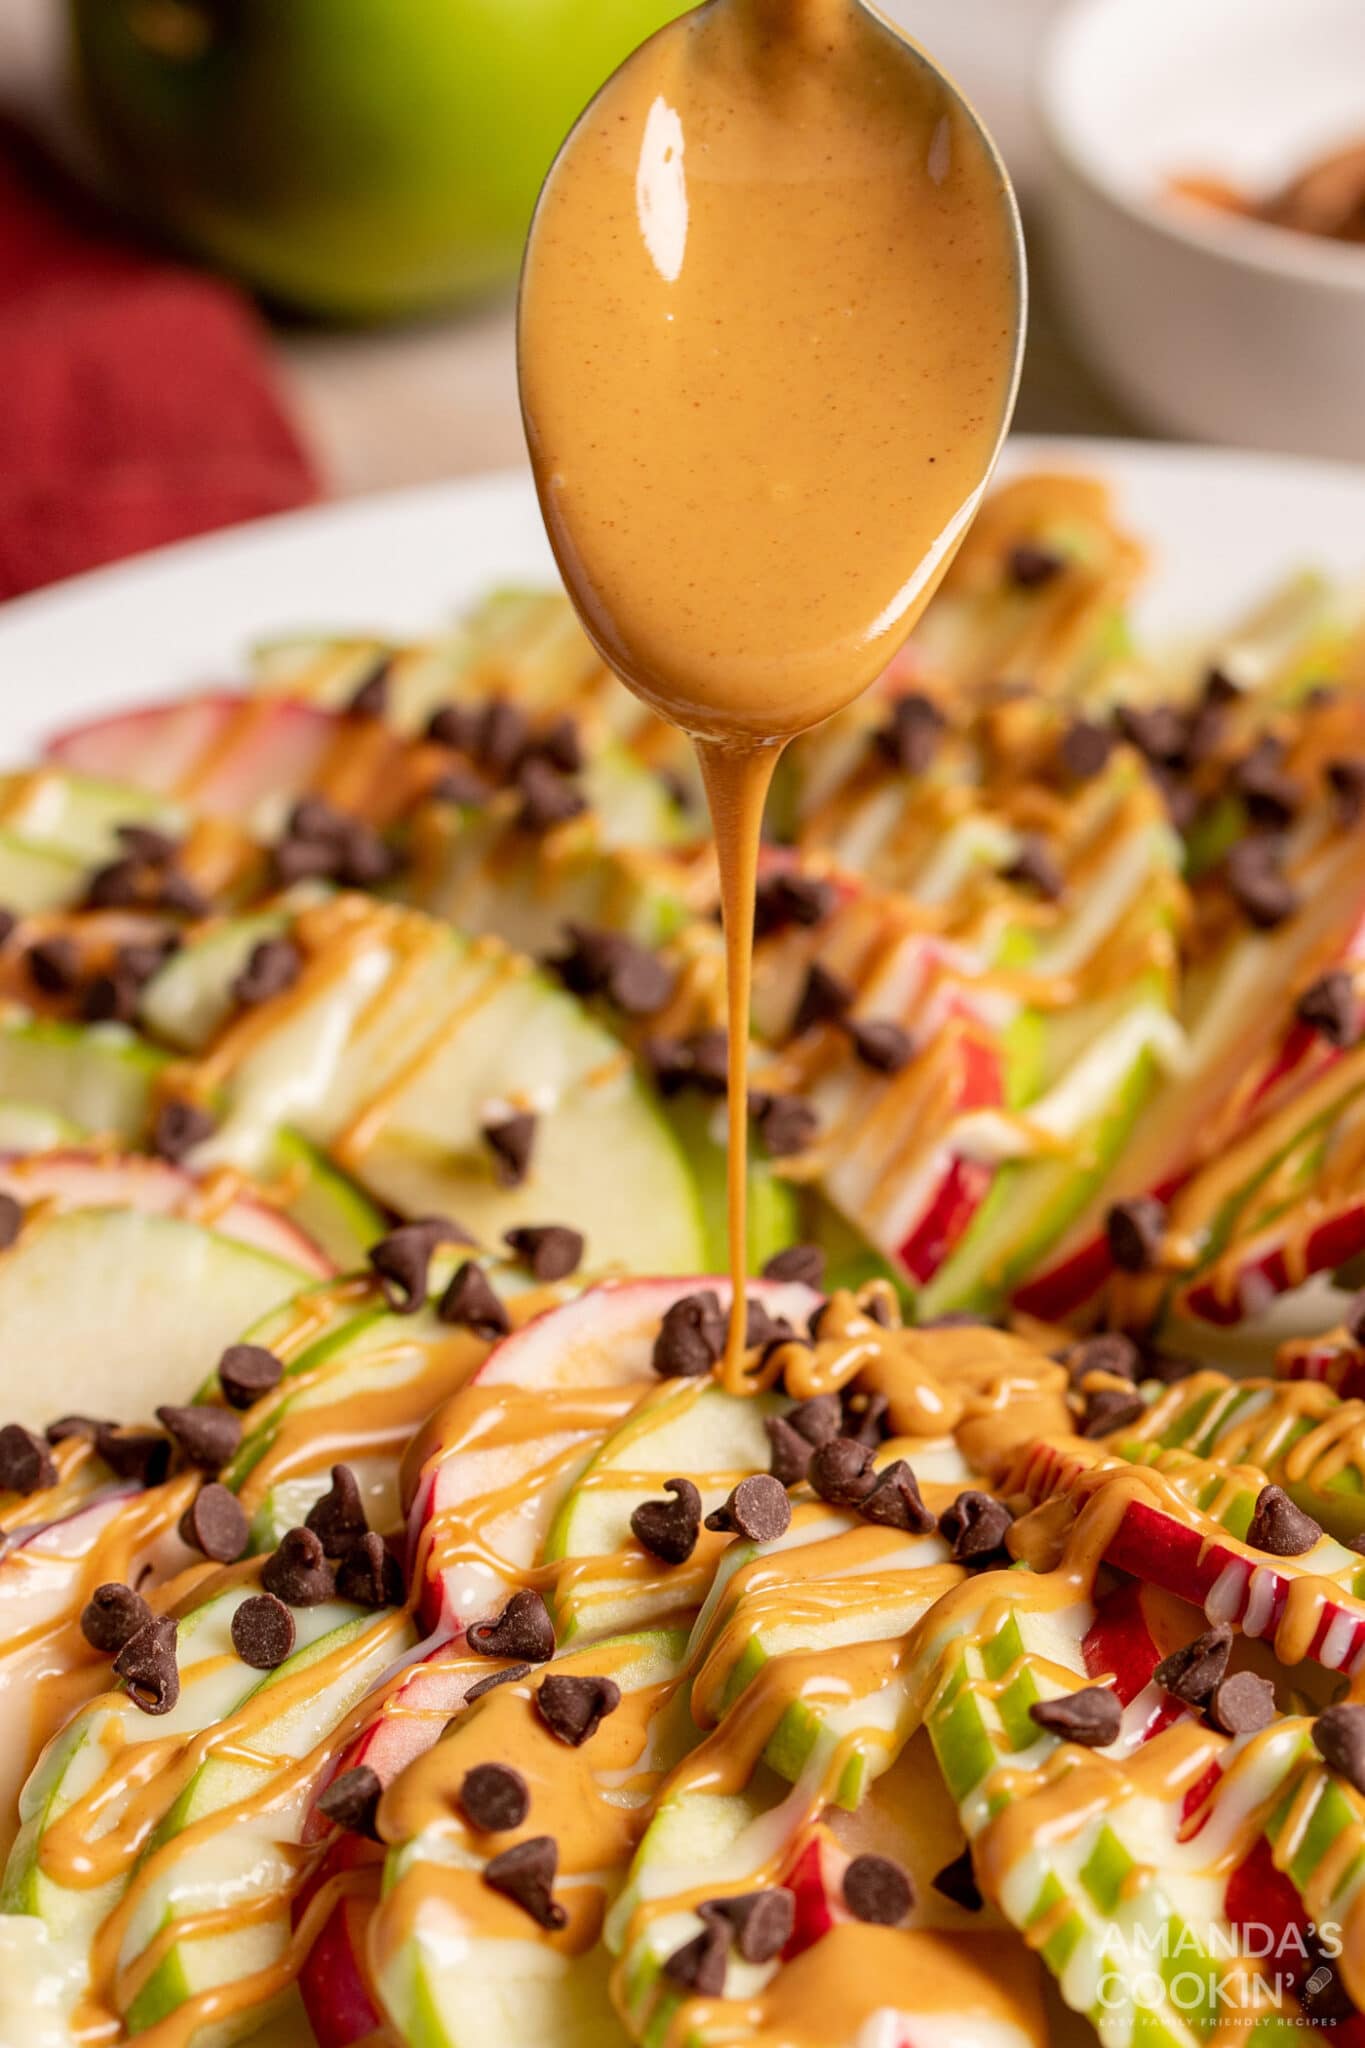 Sliced apples drizzled with peanut butter and mini chocolate chips.